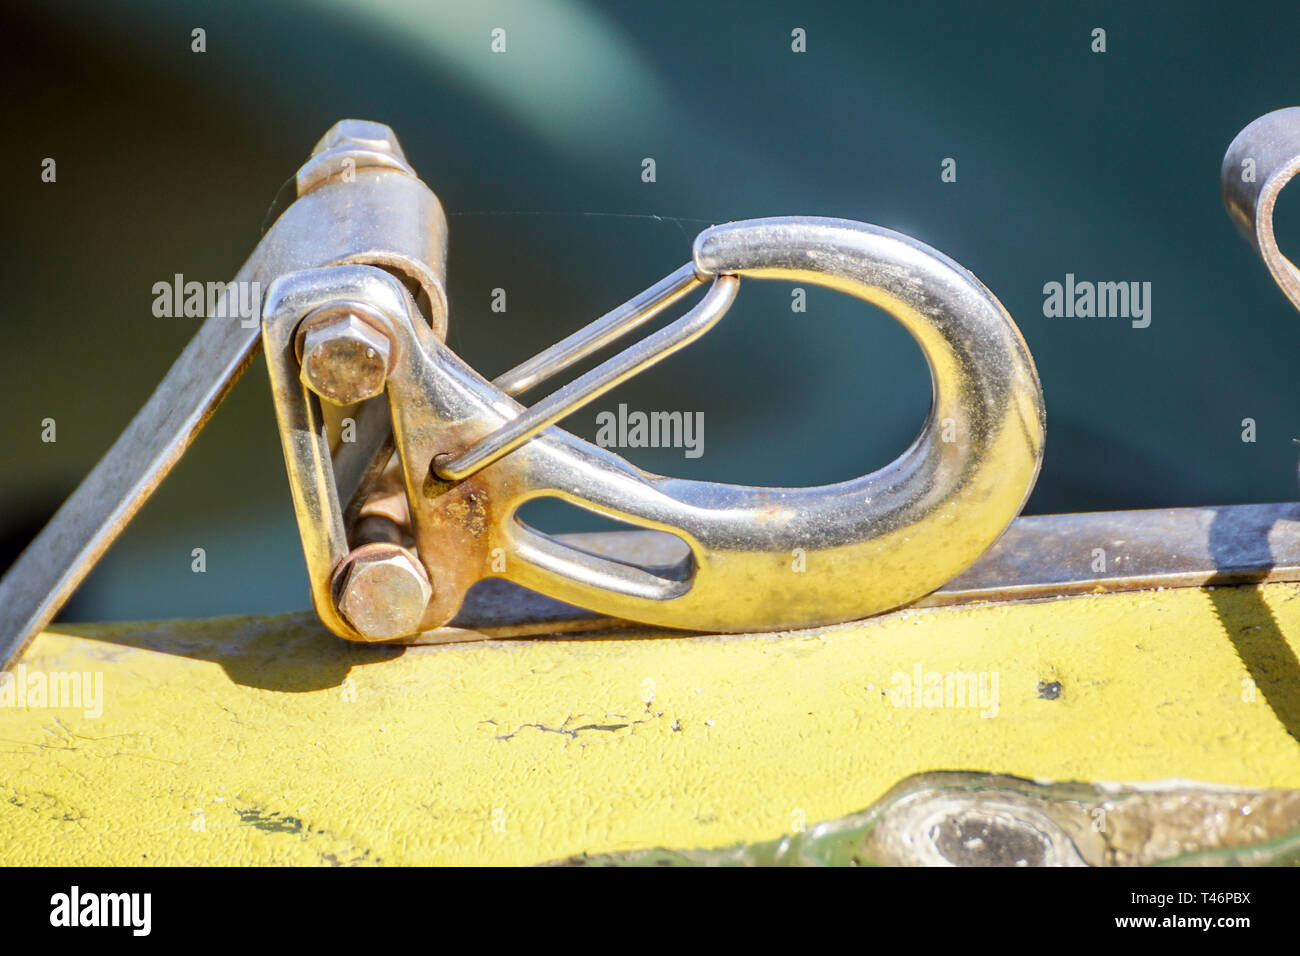 carabiner hook without a climbing rope .Climbing concept. Close up Stock Photo